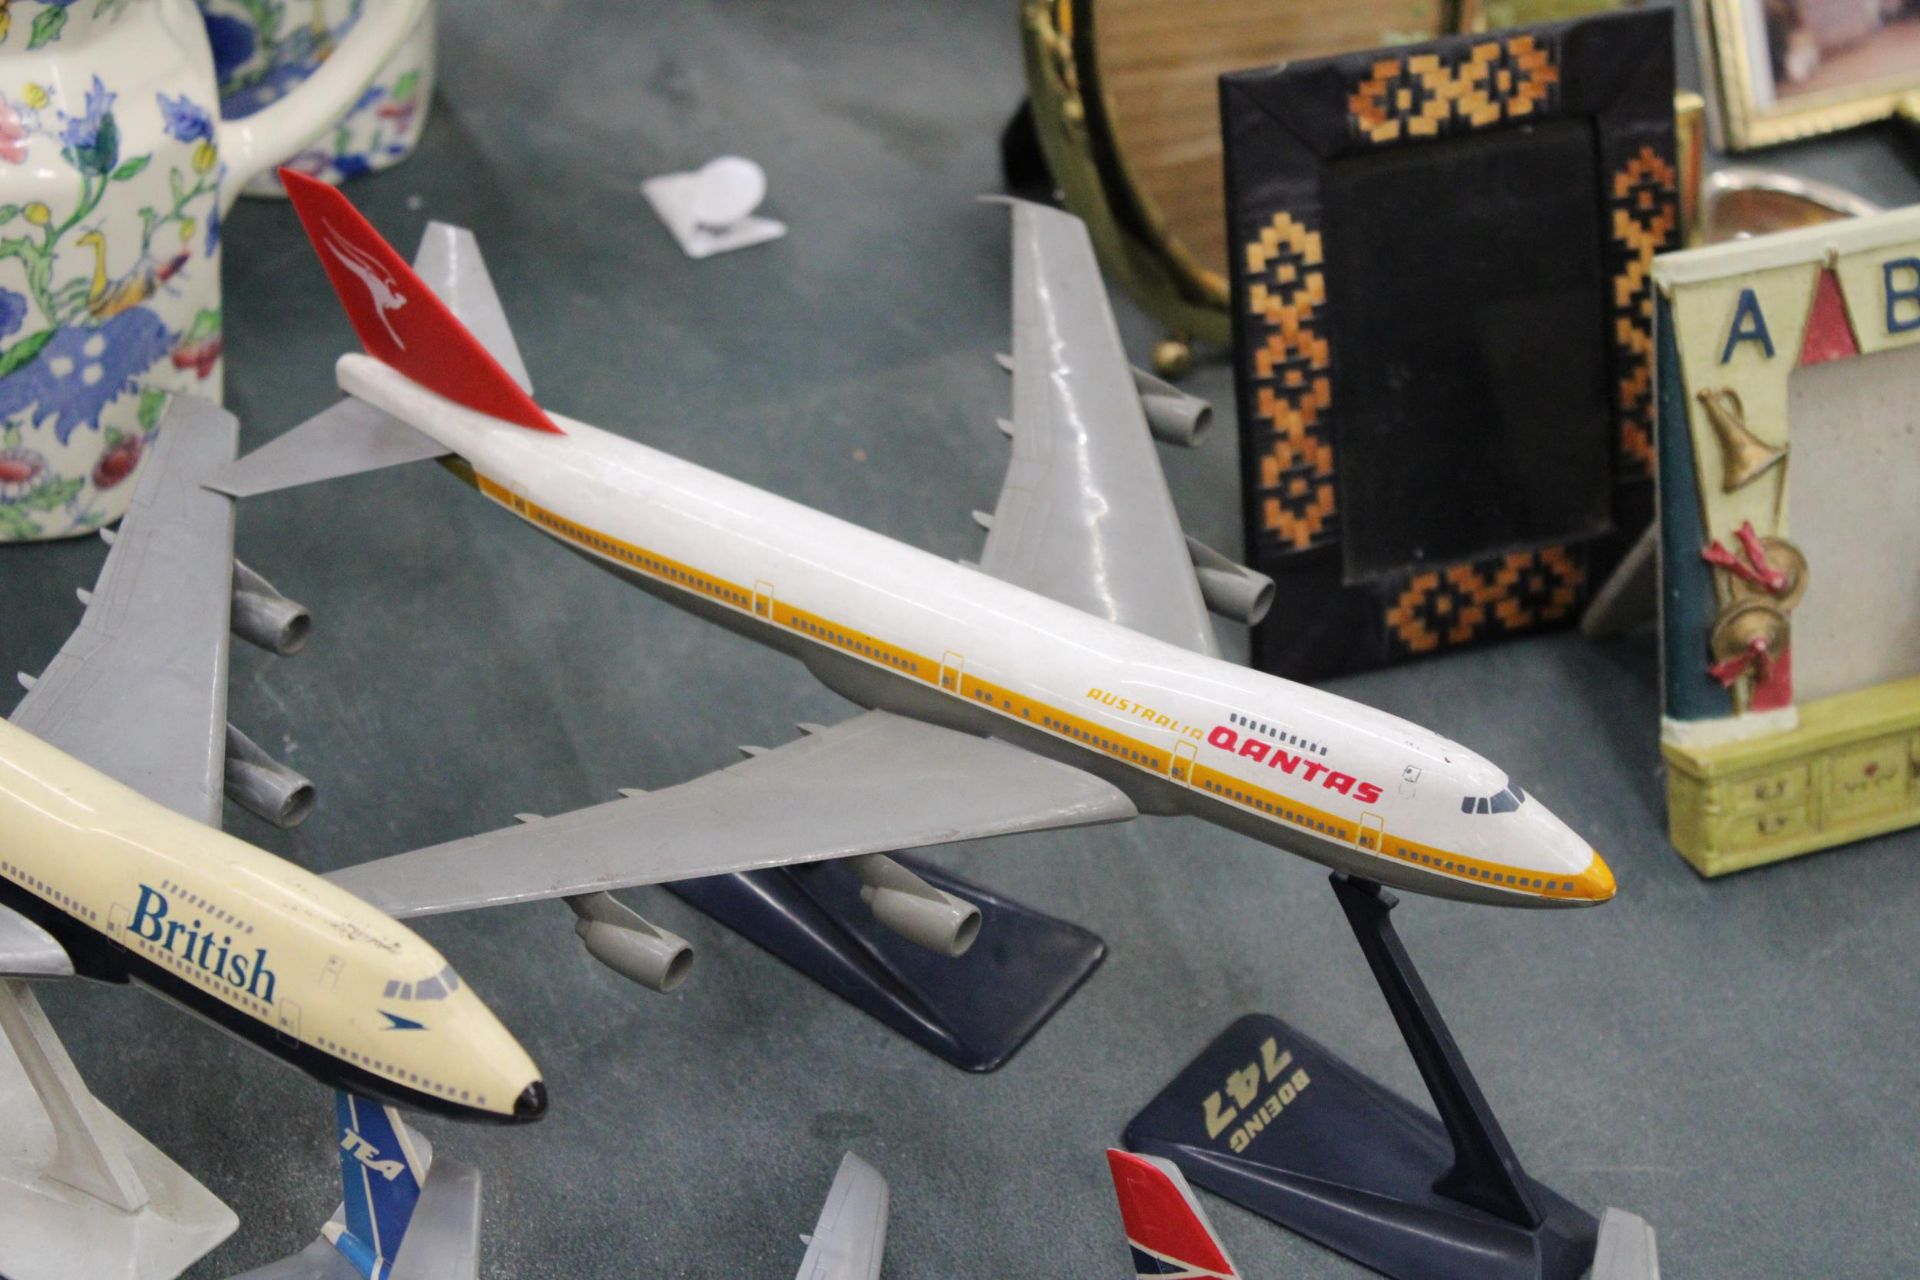 FIVE VINTAGE MODELS OF PLANES, FOUR ON PLINTHS, TO INCLUDE BRITISH AIRWAYS AND QANTAS - Image 4 of 6